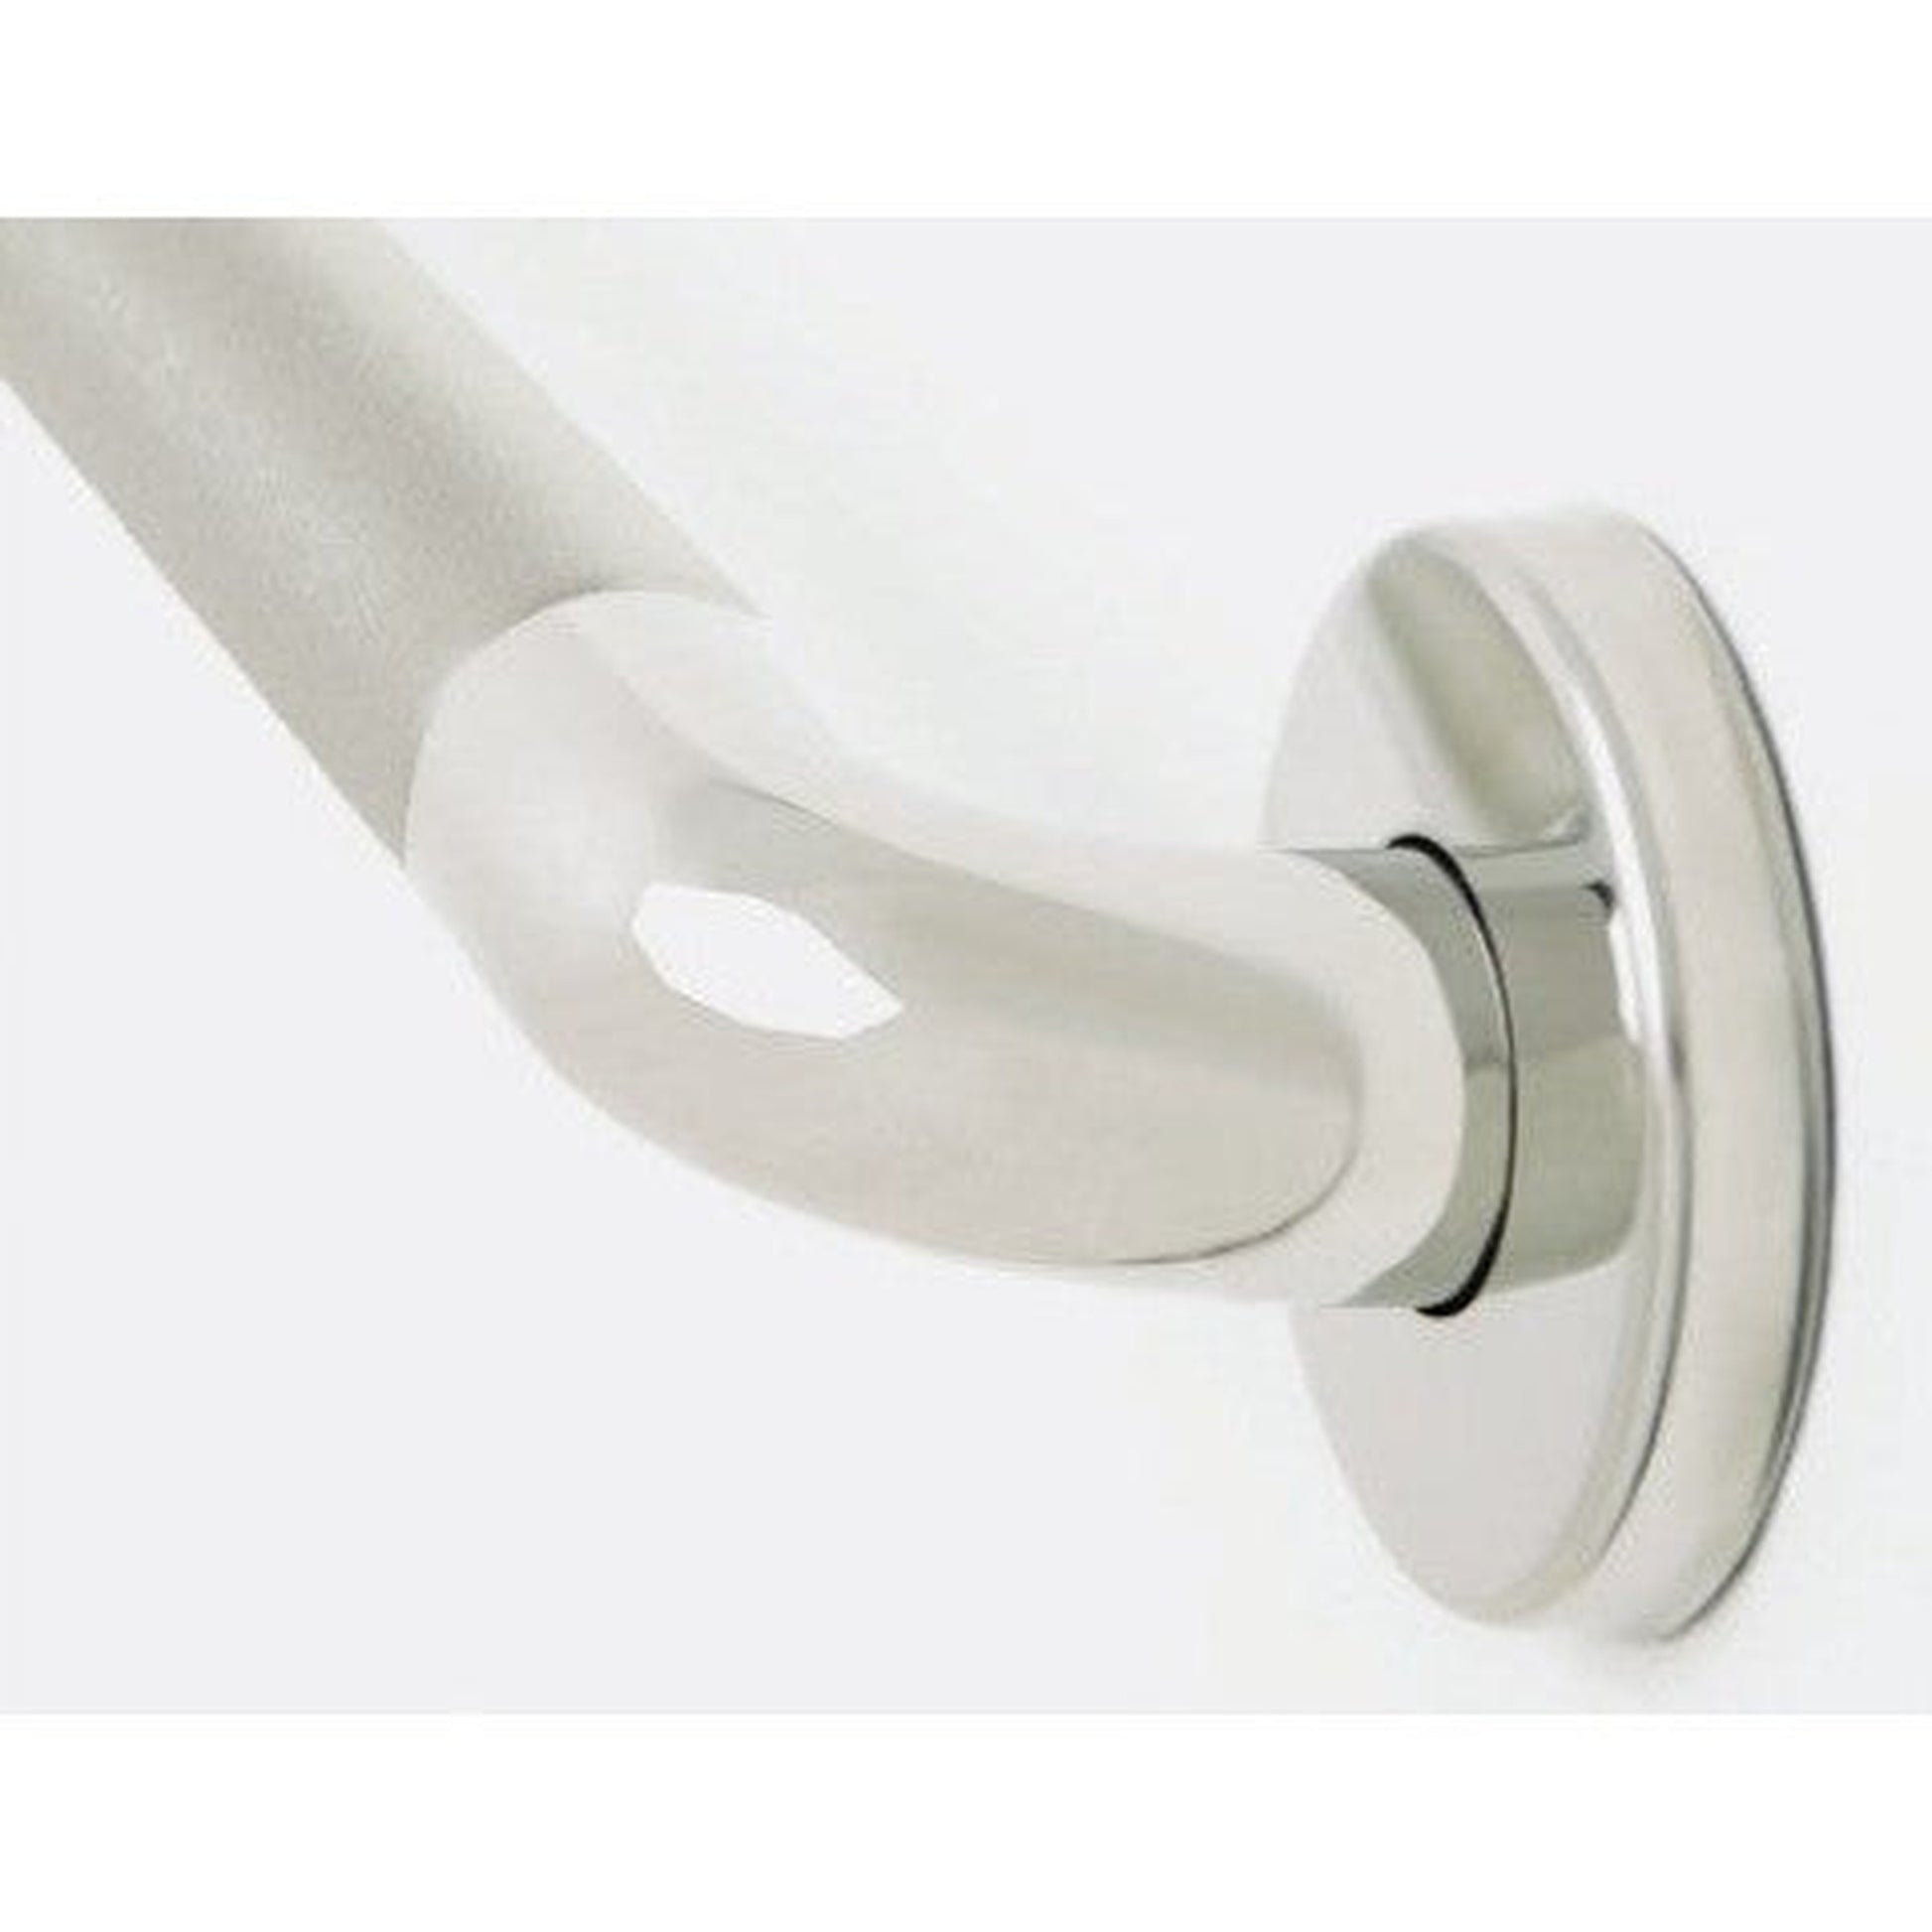 Seachrome Signature Series Value Line IGZS 48" Peened Stainless Steel With Polished Ends 1.25" Tube Diameter Concealed Flange Grab Bar